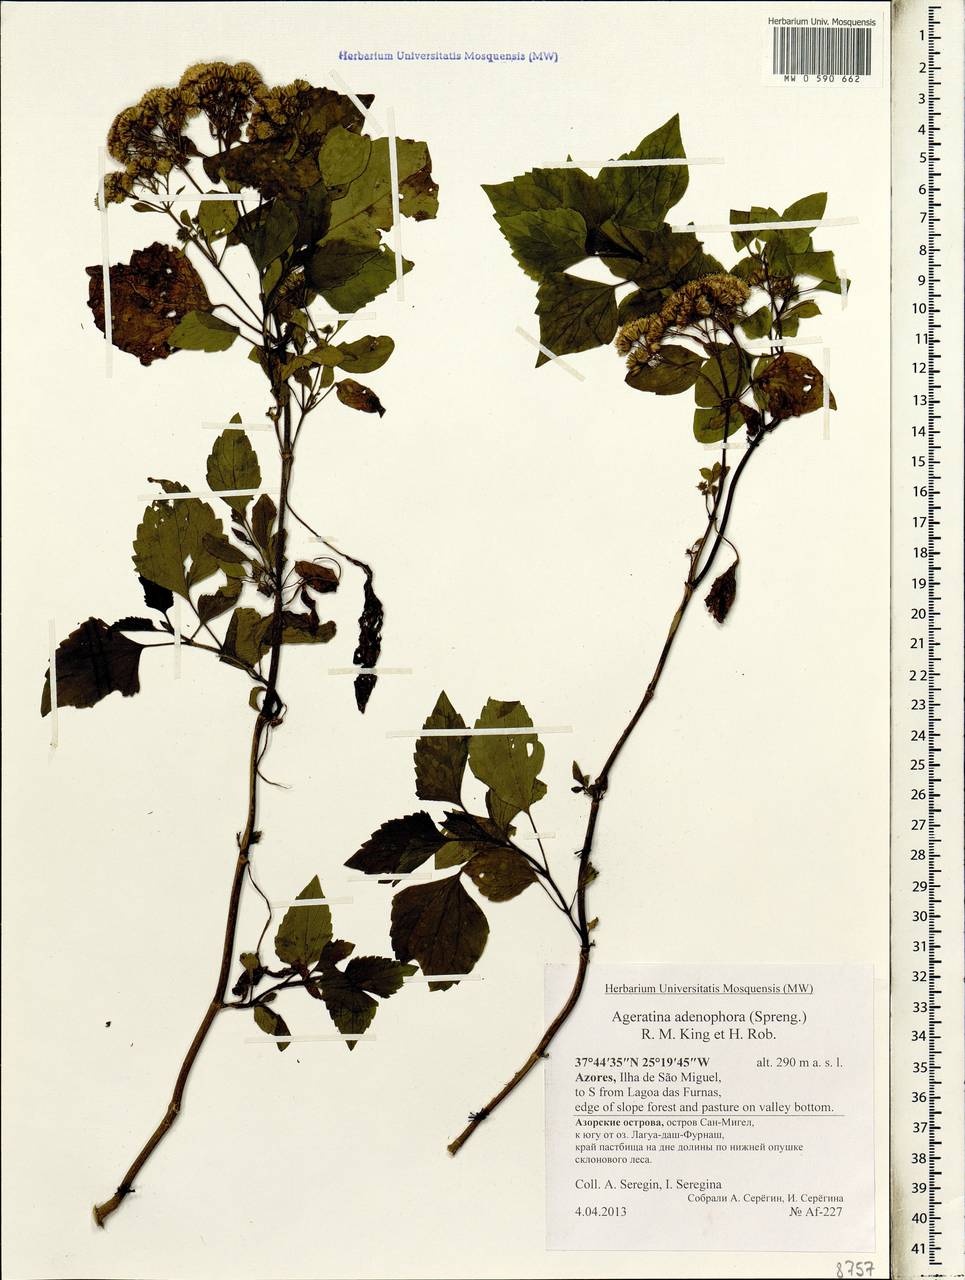 Ageratina adenophora (Spreng.) R. King & H. Rob., Africa (AFR) (Portugal)